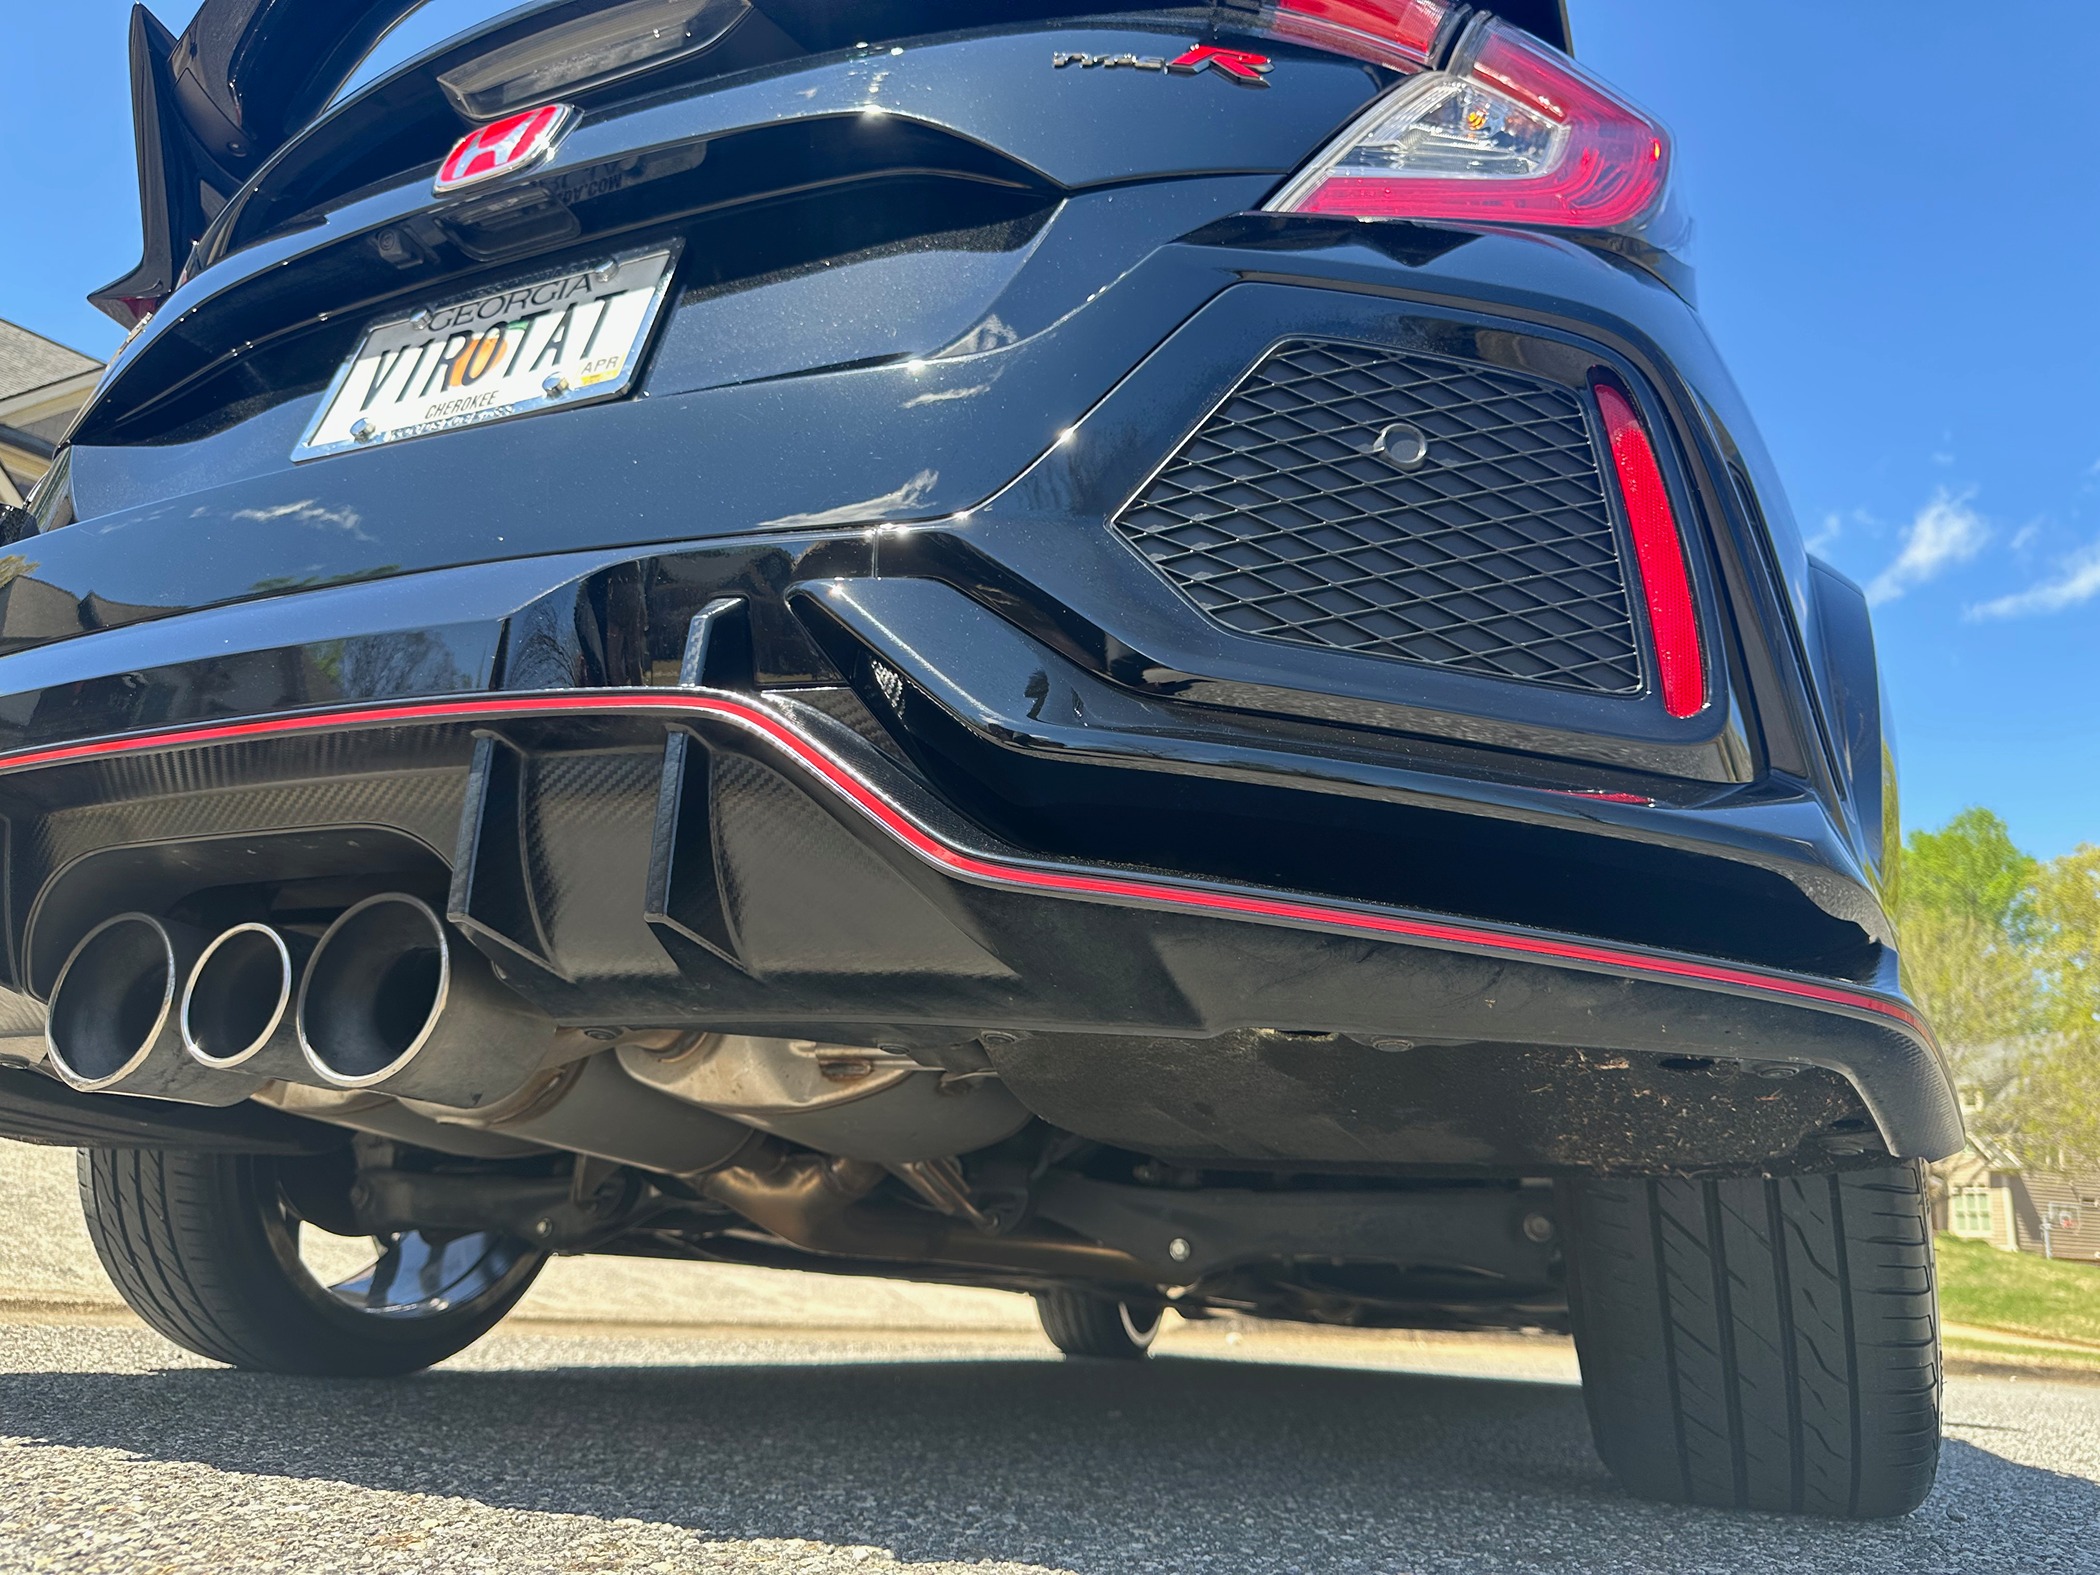 Honda Civic 10th gen Sold. 2019 Civic Type R for sale IMG_8143